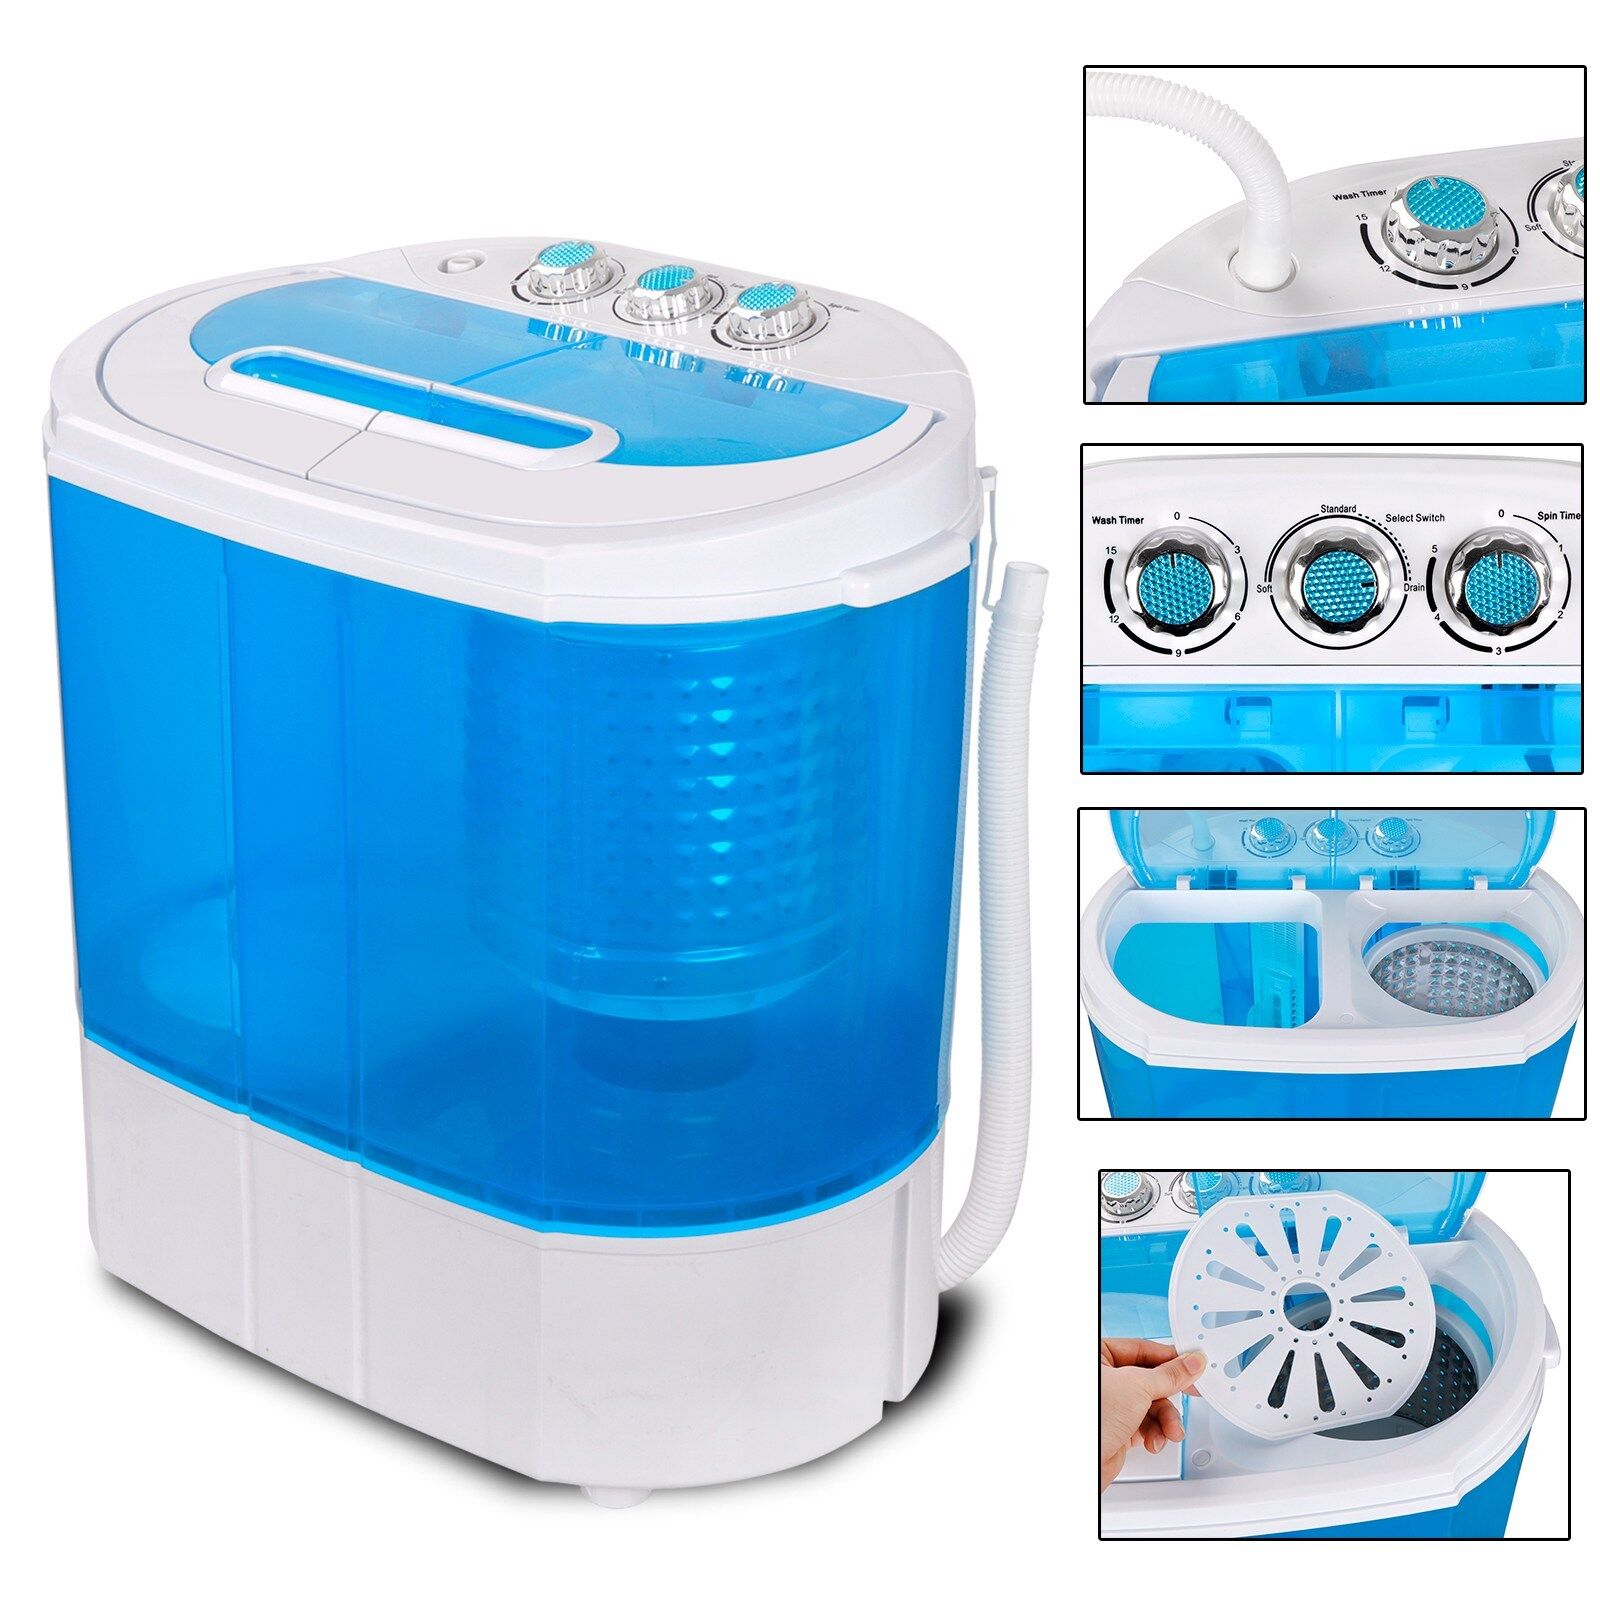 Portable Washing Machine 10lbs Washer w/ Spin Cycle Dryer